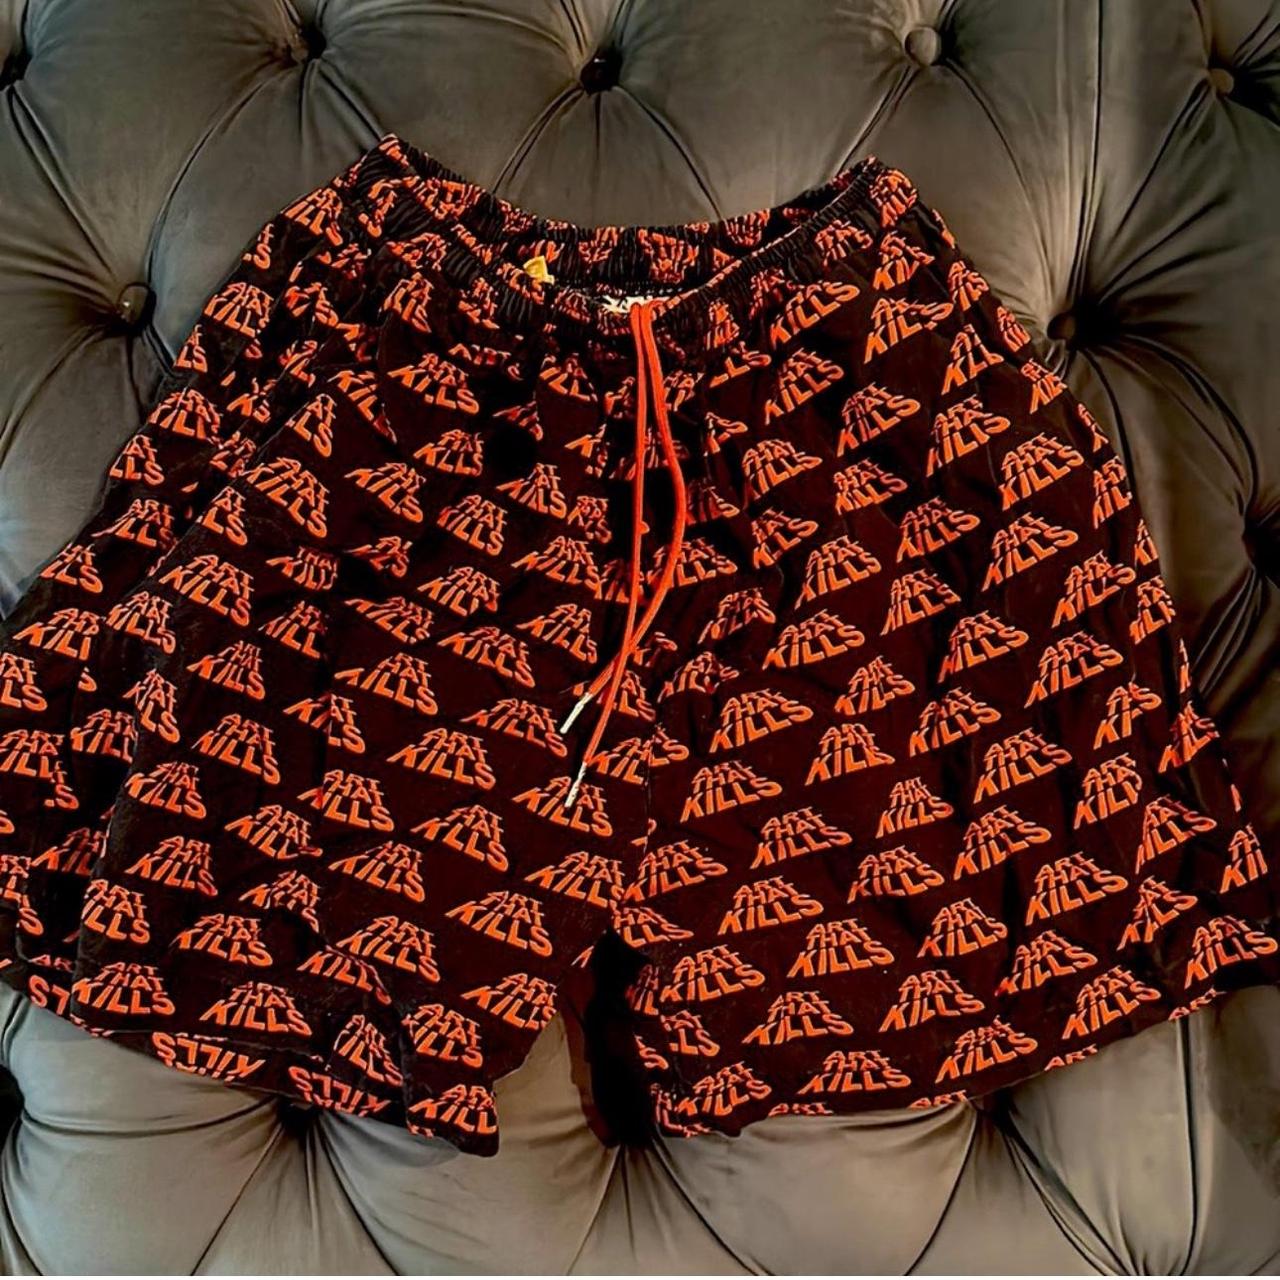 Gallery Dept Awesome ATK shorts